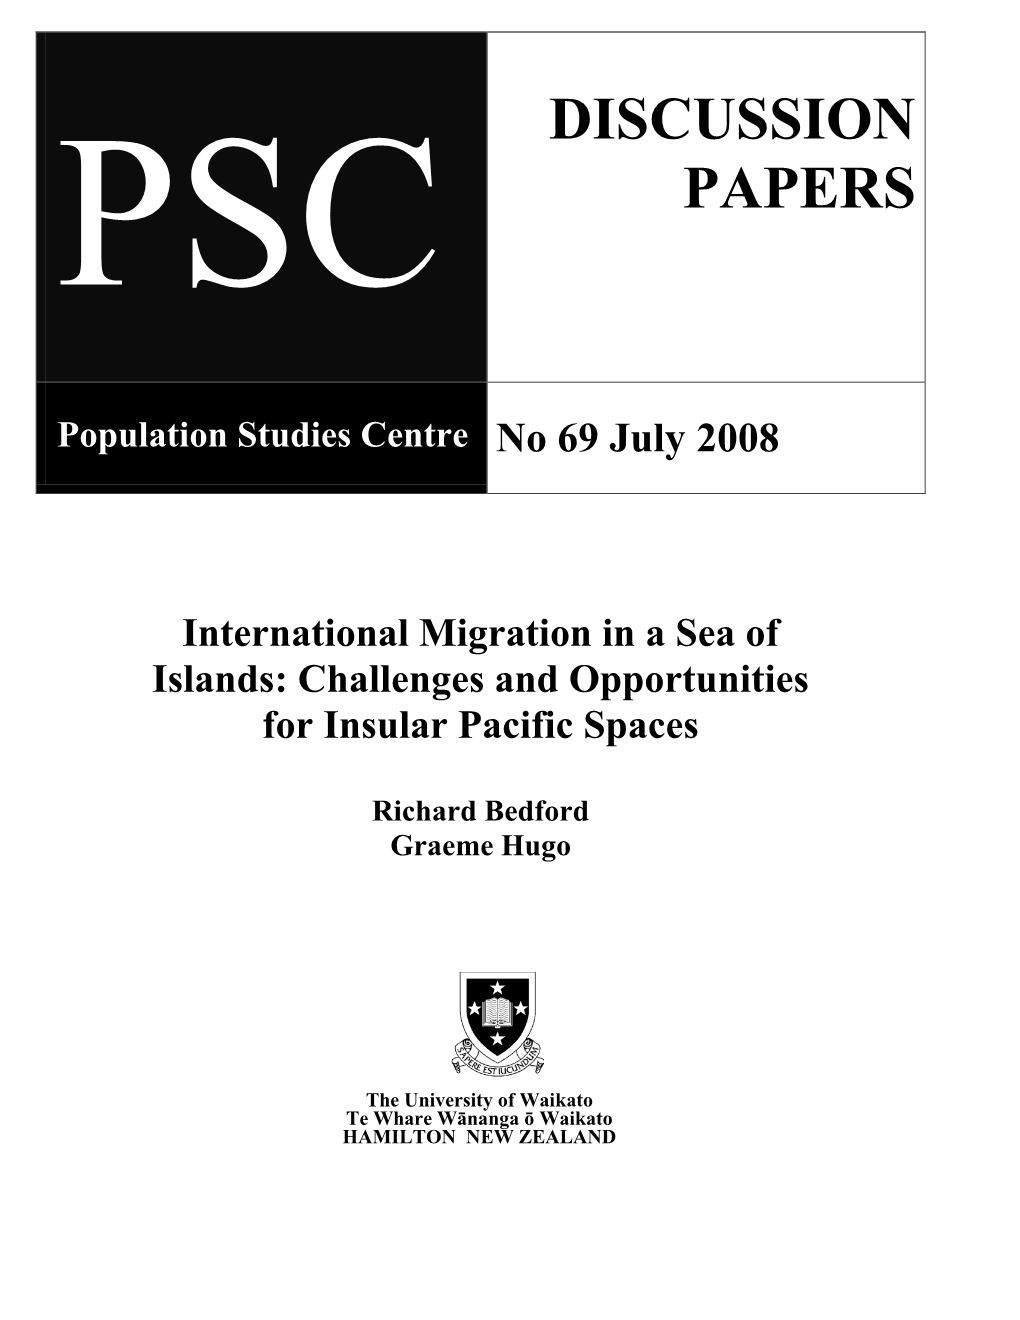 As an Expert on Migration in Pacific Insular Spaces, Your Perspectives